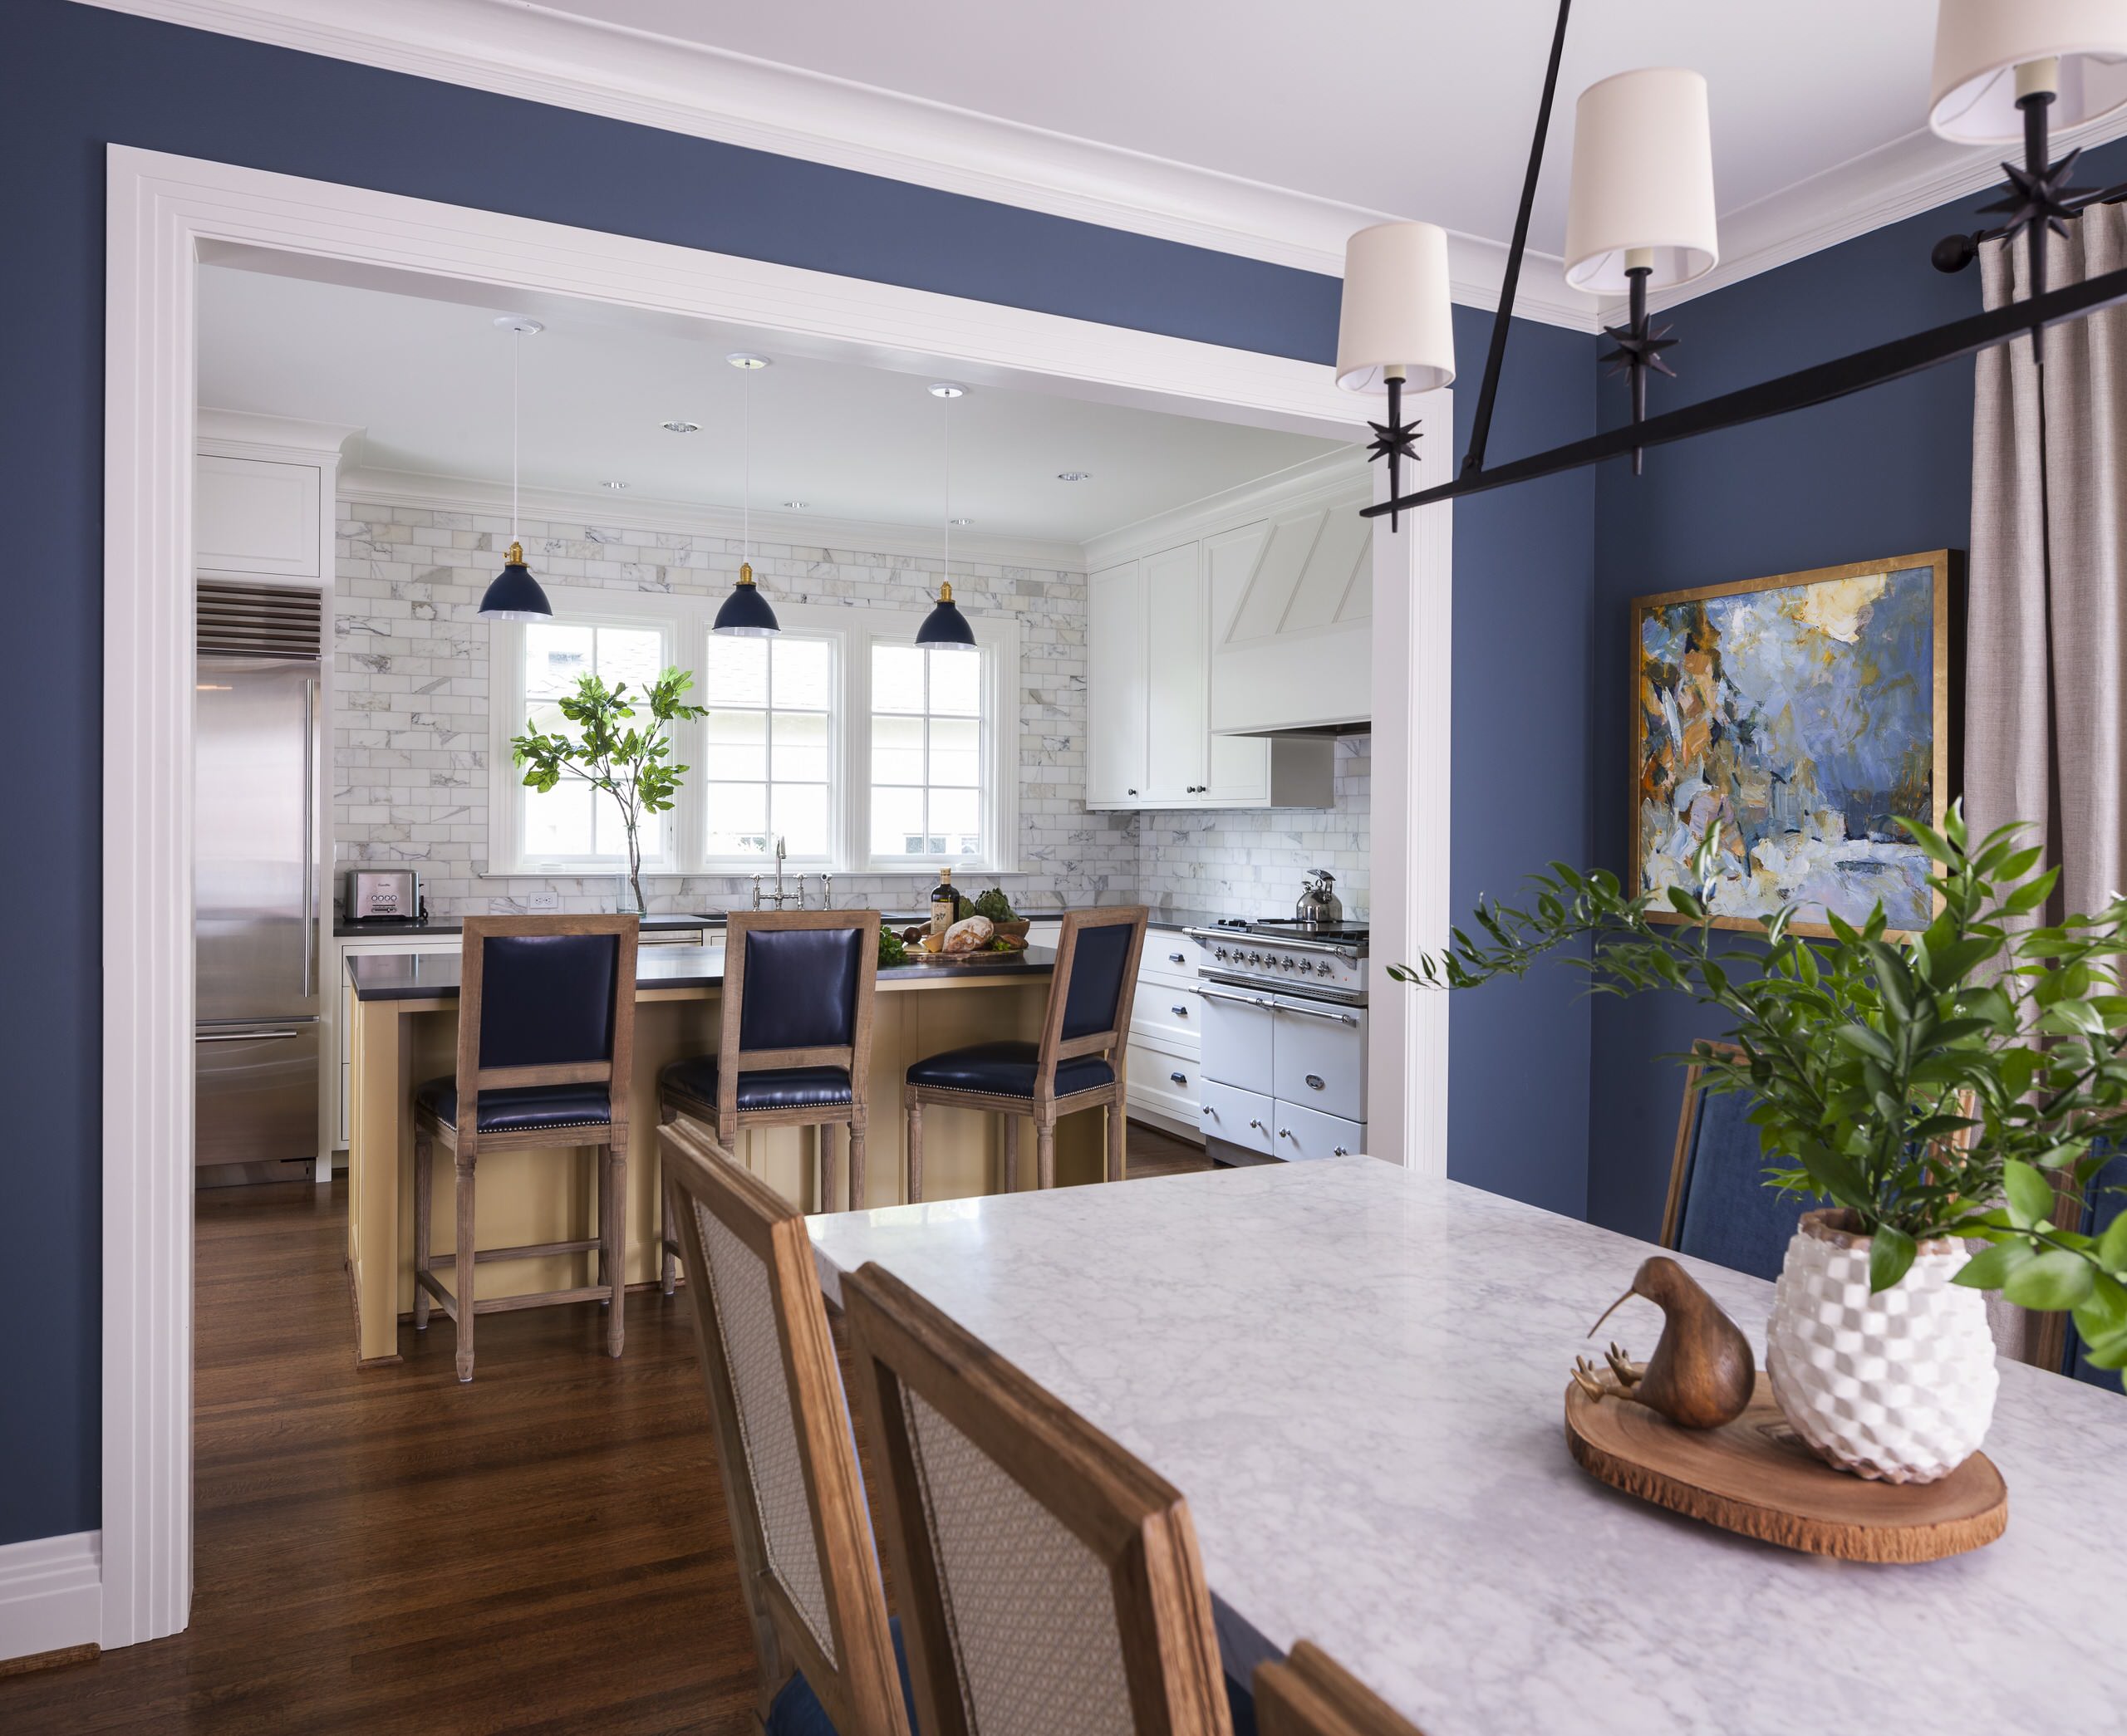 75 Beautiful Dining Room With Blue Walls Pictures Ideas February 2021 Houzz